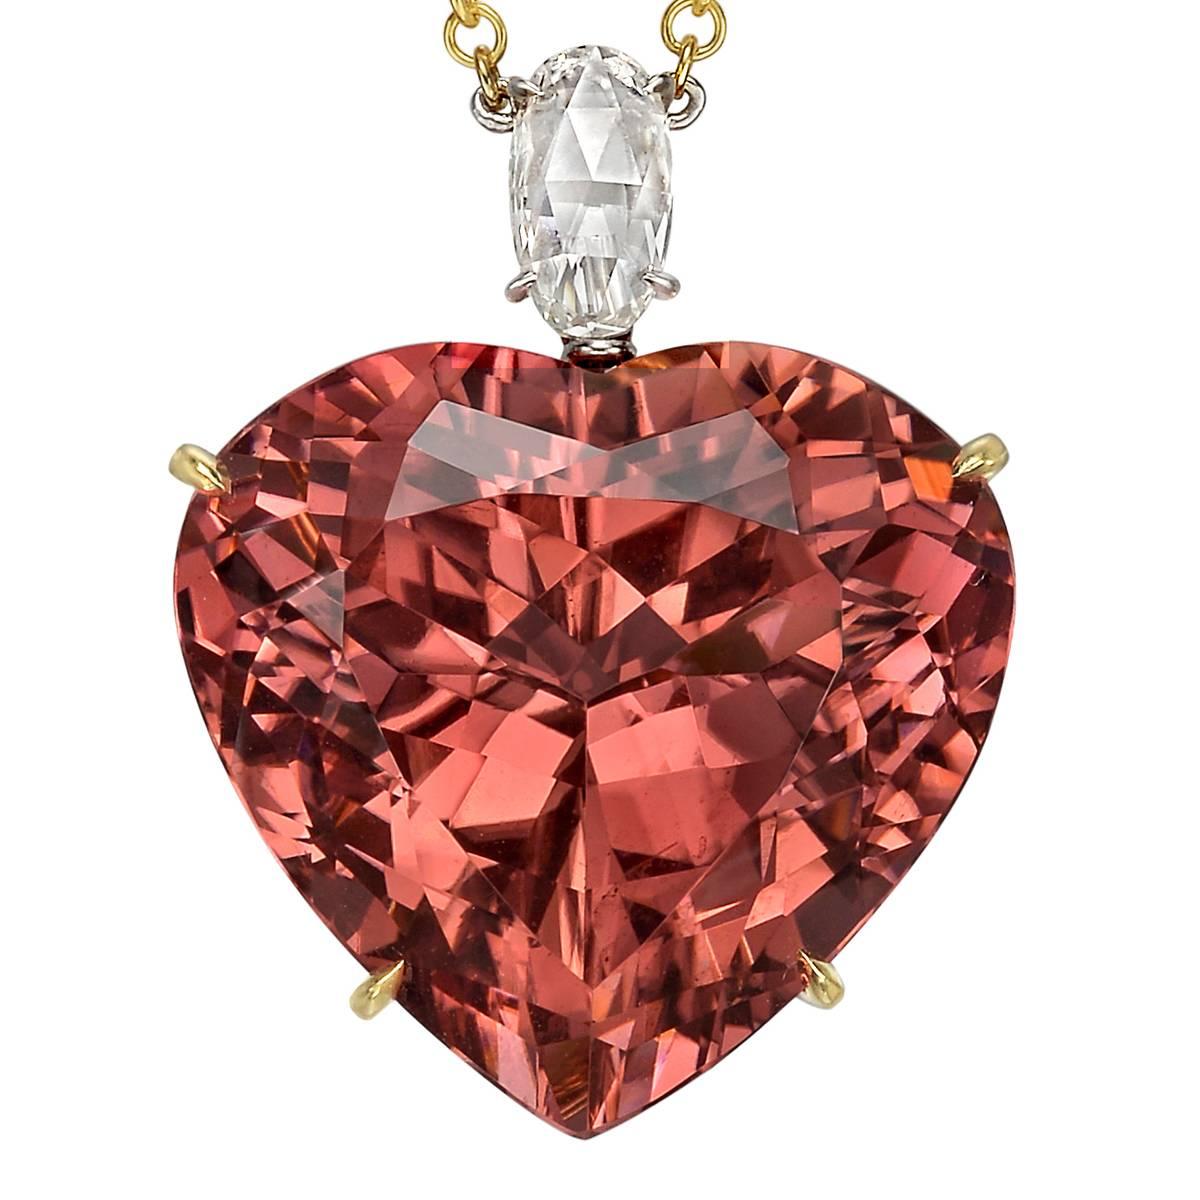 Pendant necklace, showcasing a large heart-shaped pink tourmaline weighing 32.73 carats (measuring approximately 21 x 20mm) with an oval rose-cut diamond surmount weighing 0.90 carats, in 18k yellow gold, the pendant suspended from a 16